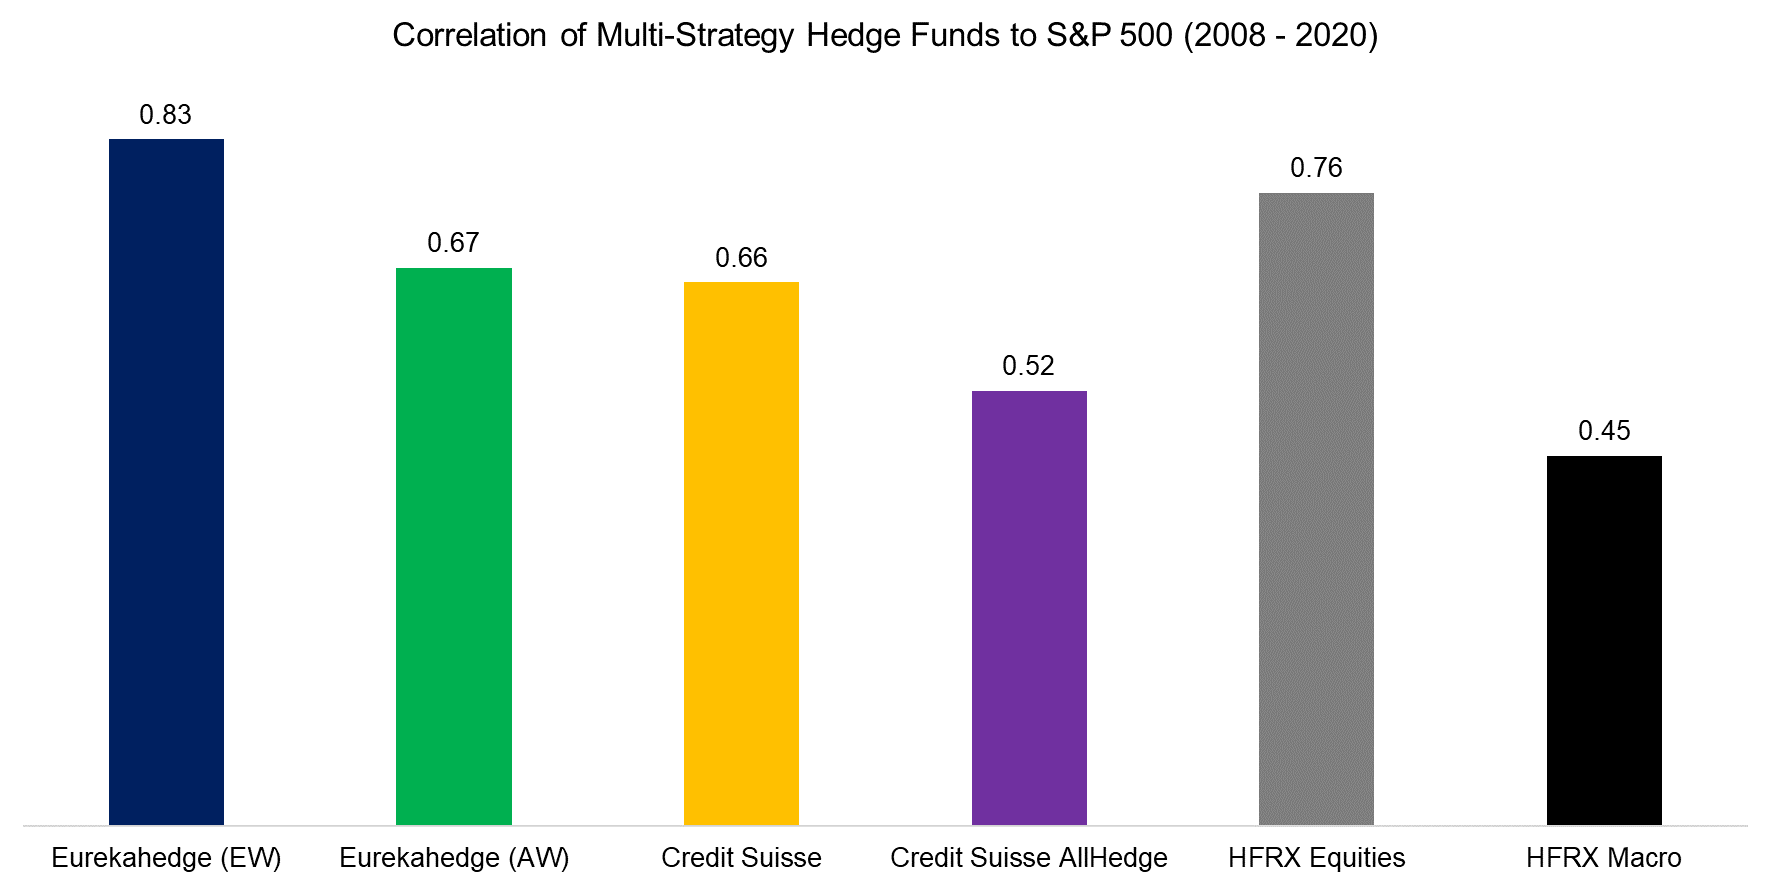 Correlation of Multi-Strategy Hedge Funds to S&P 500 (2008 - 2020)